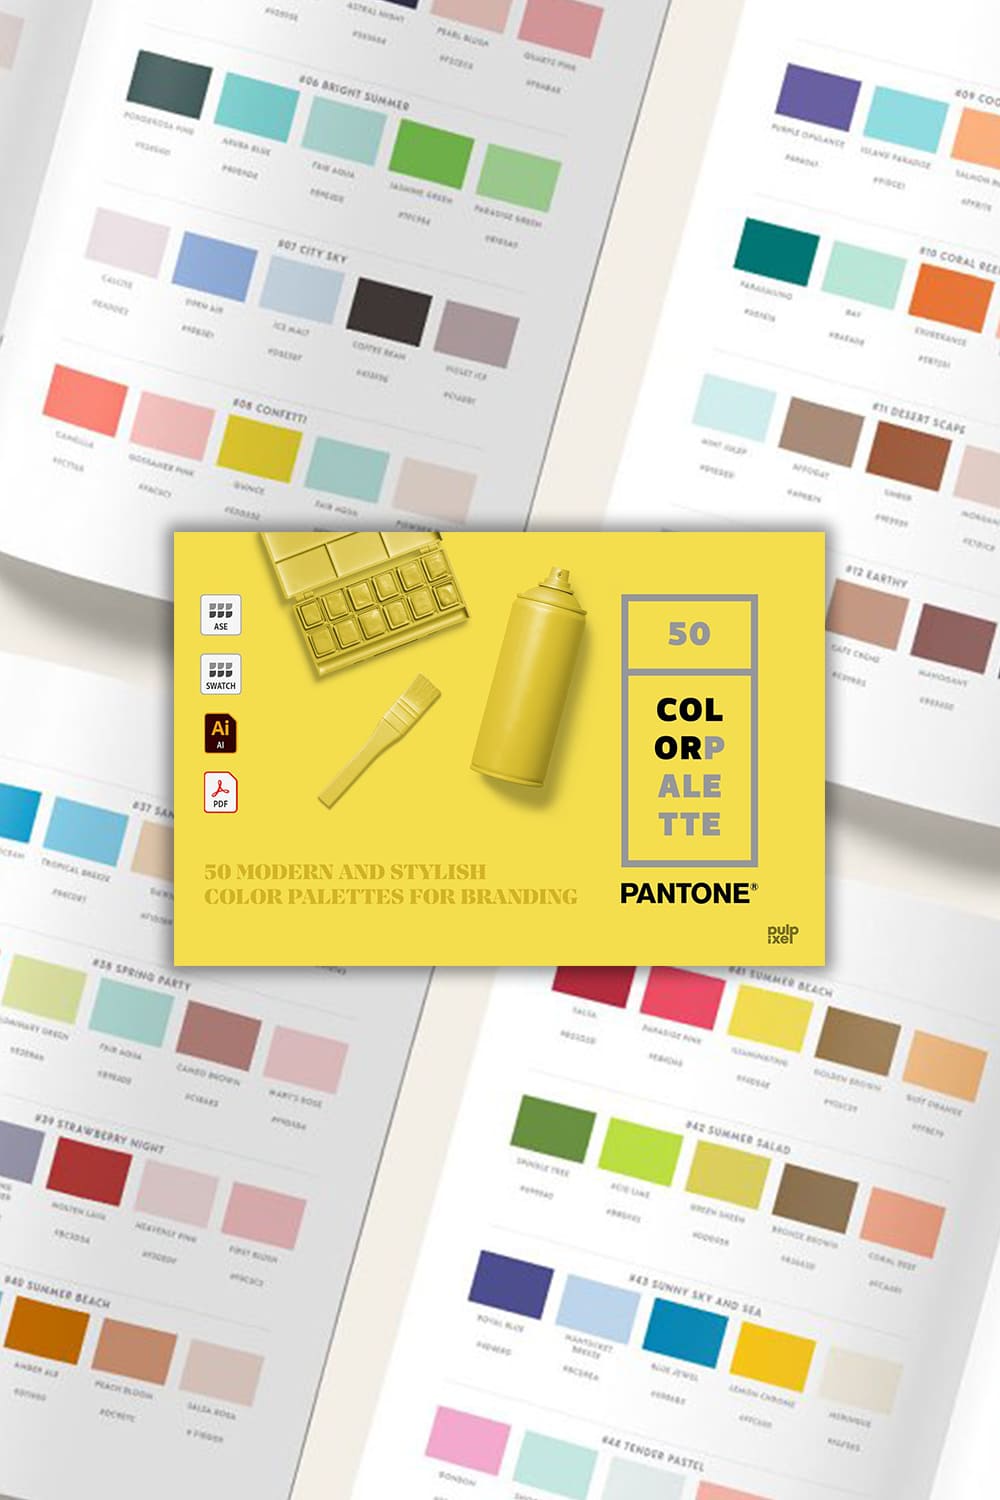 Pantone - 50 Modern And Stylish Color Palettes For Branding.